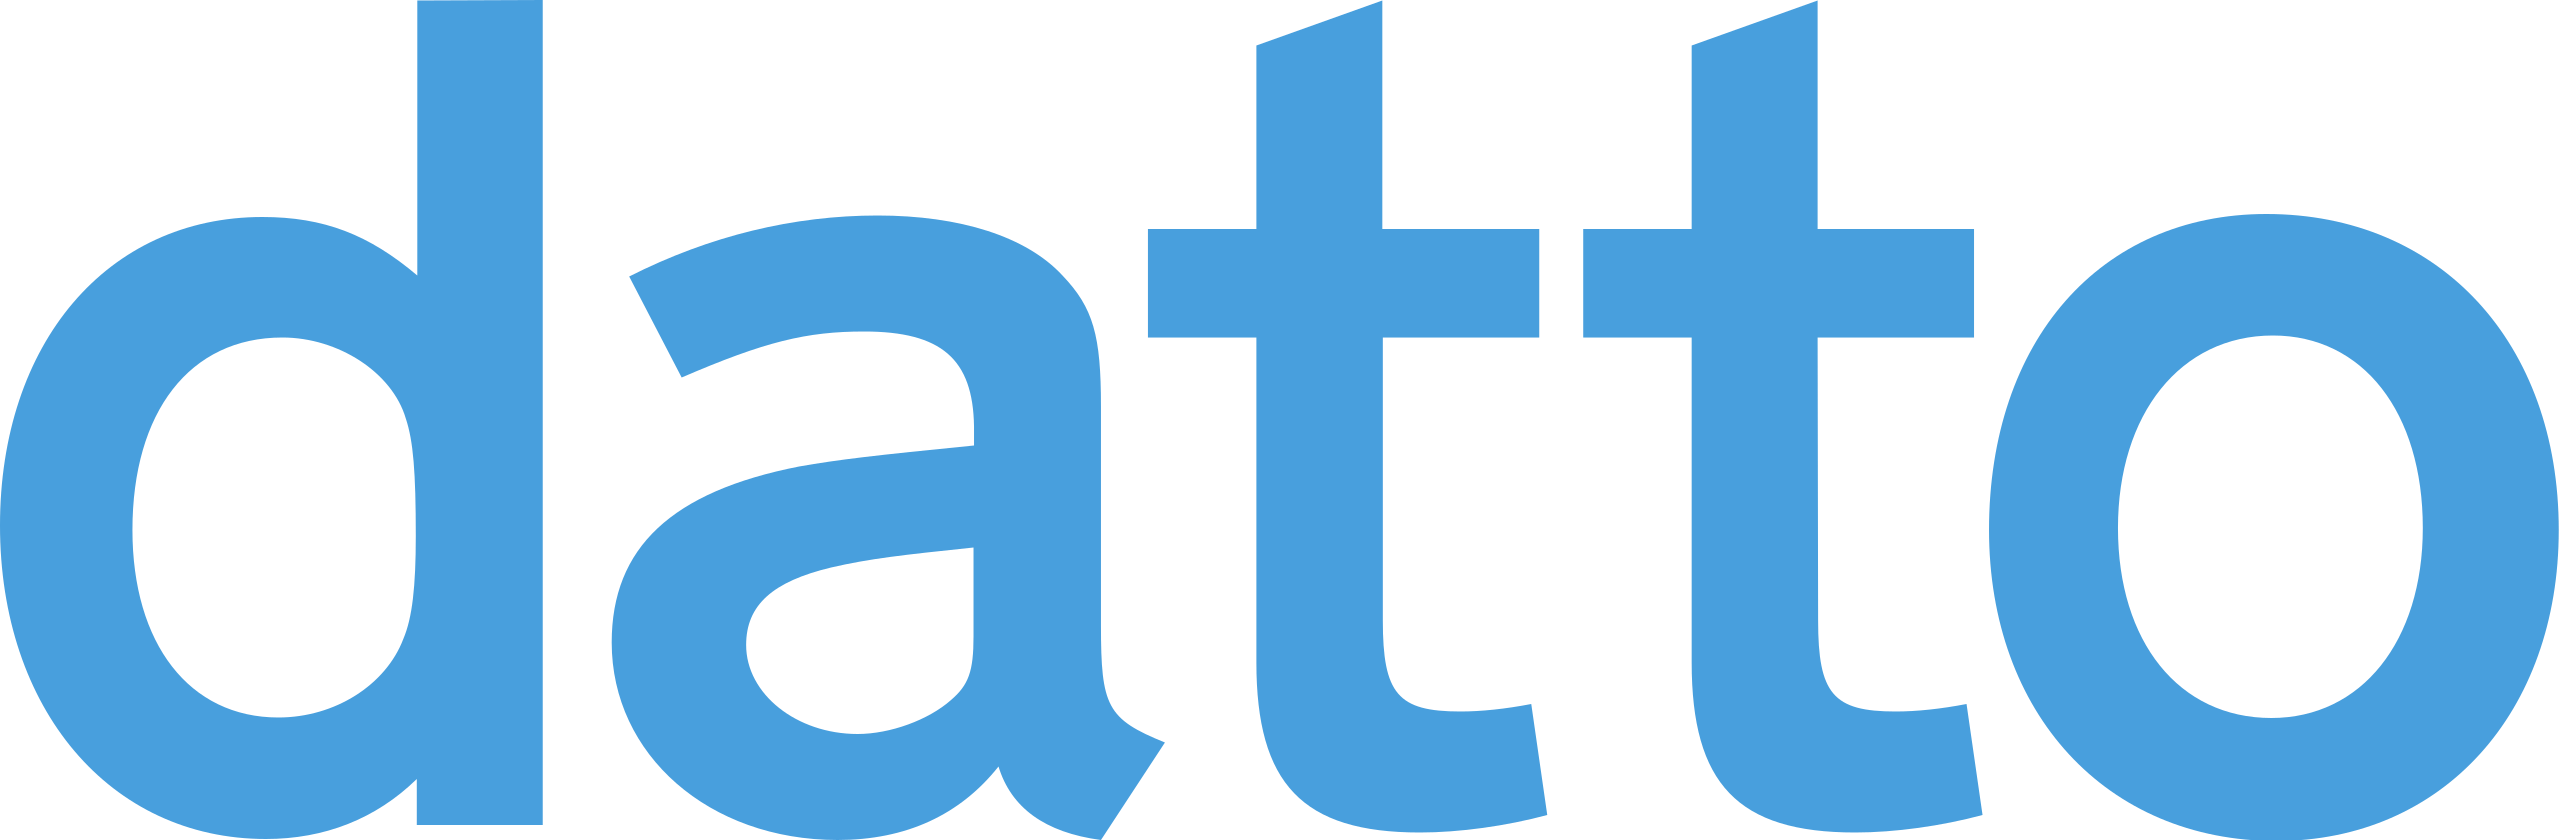 datto backup admin | datto backup support | datto backup setup and monitoring Spire IT Services